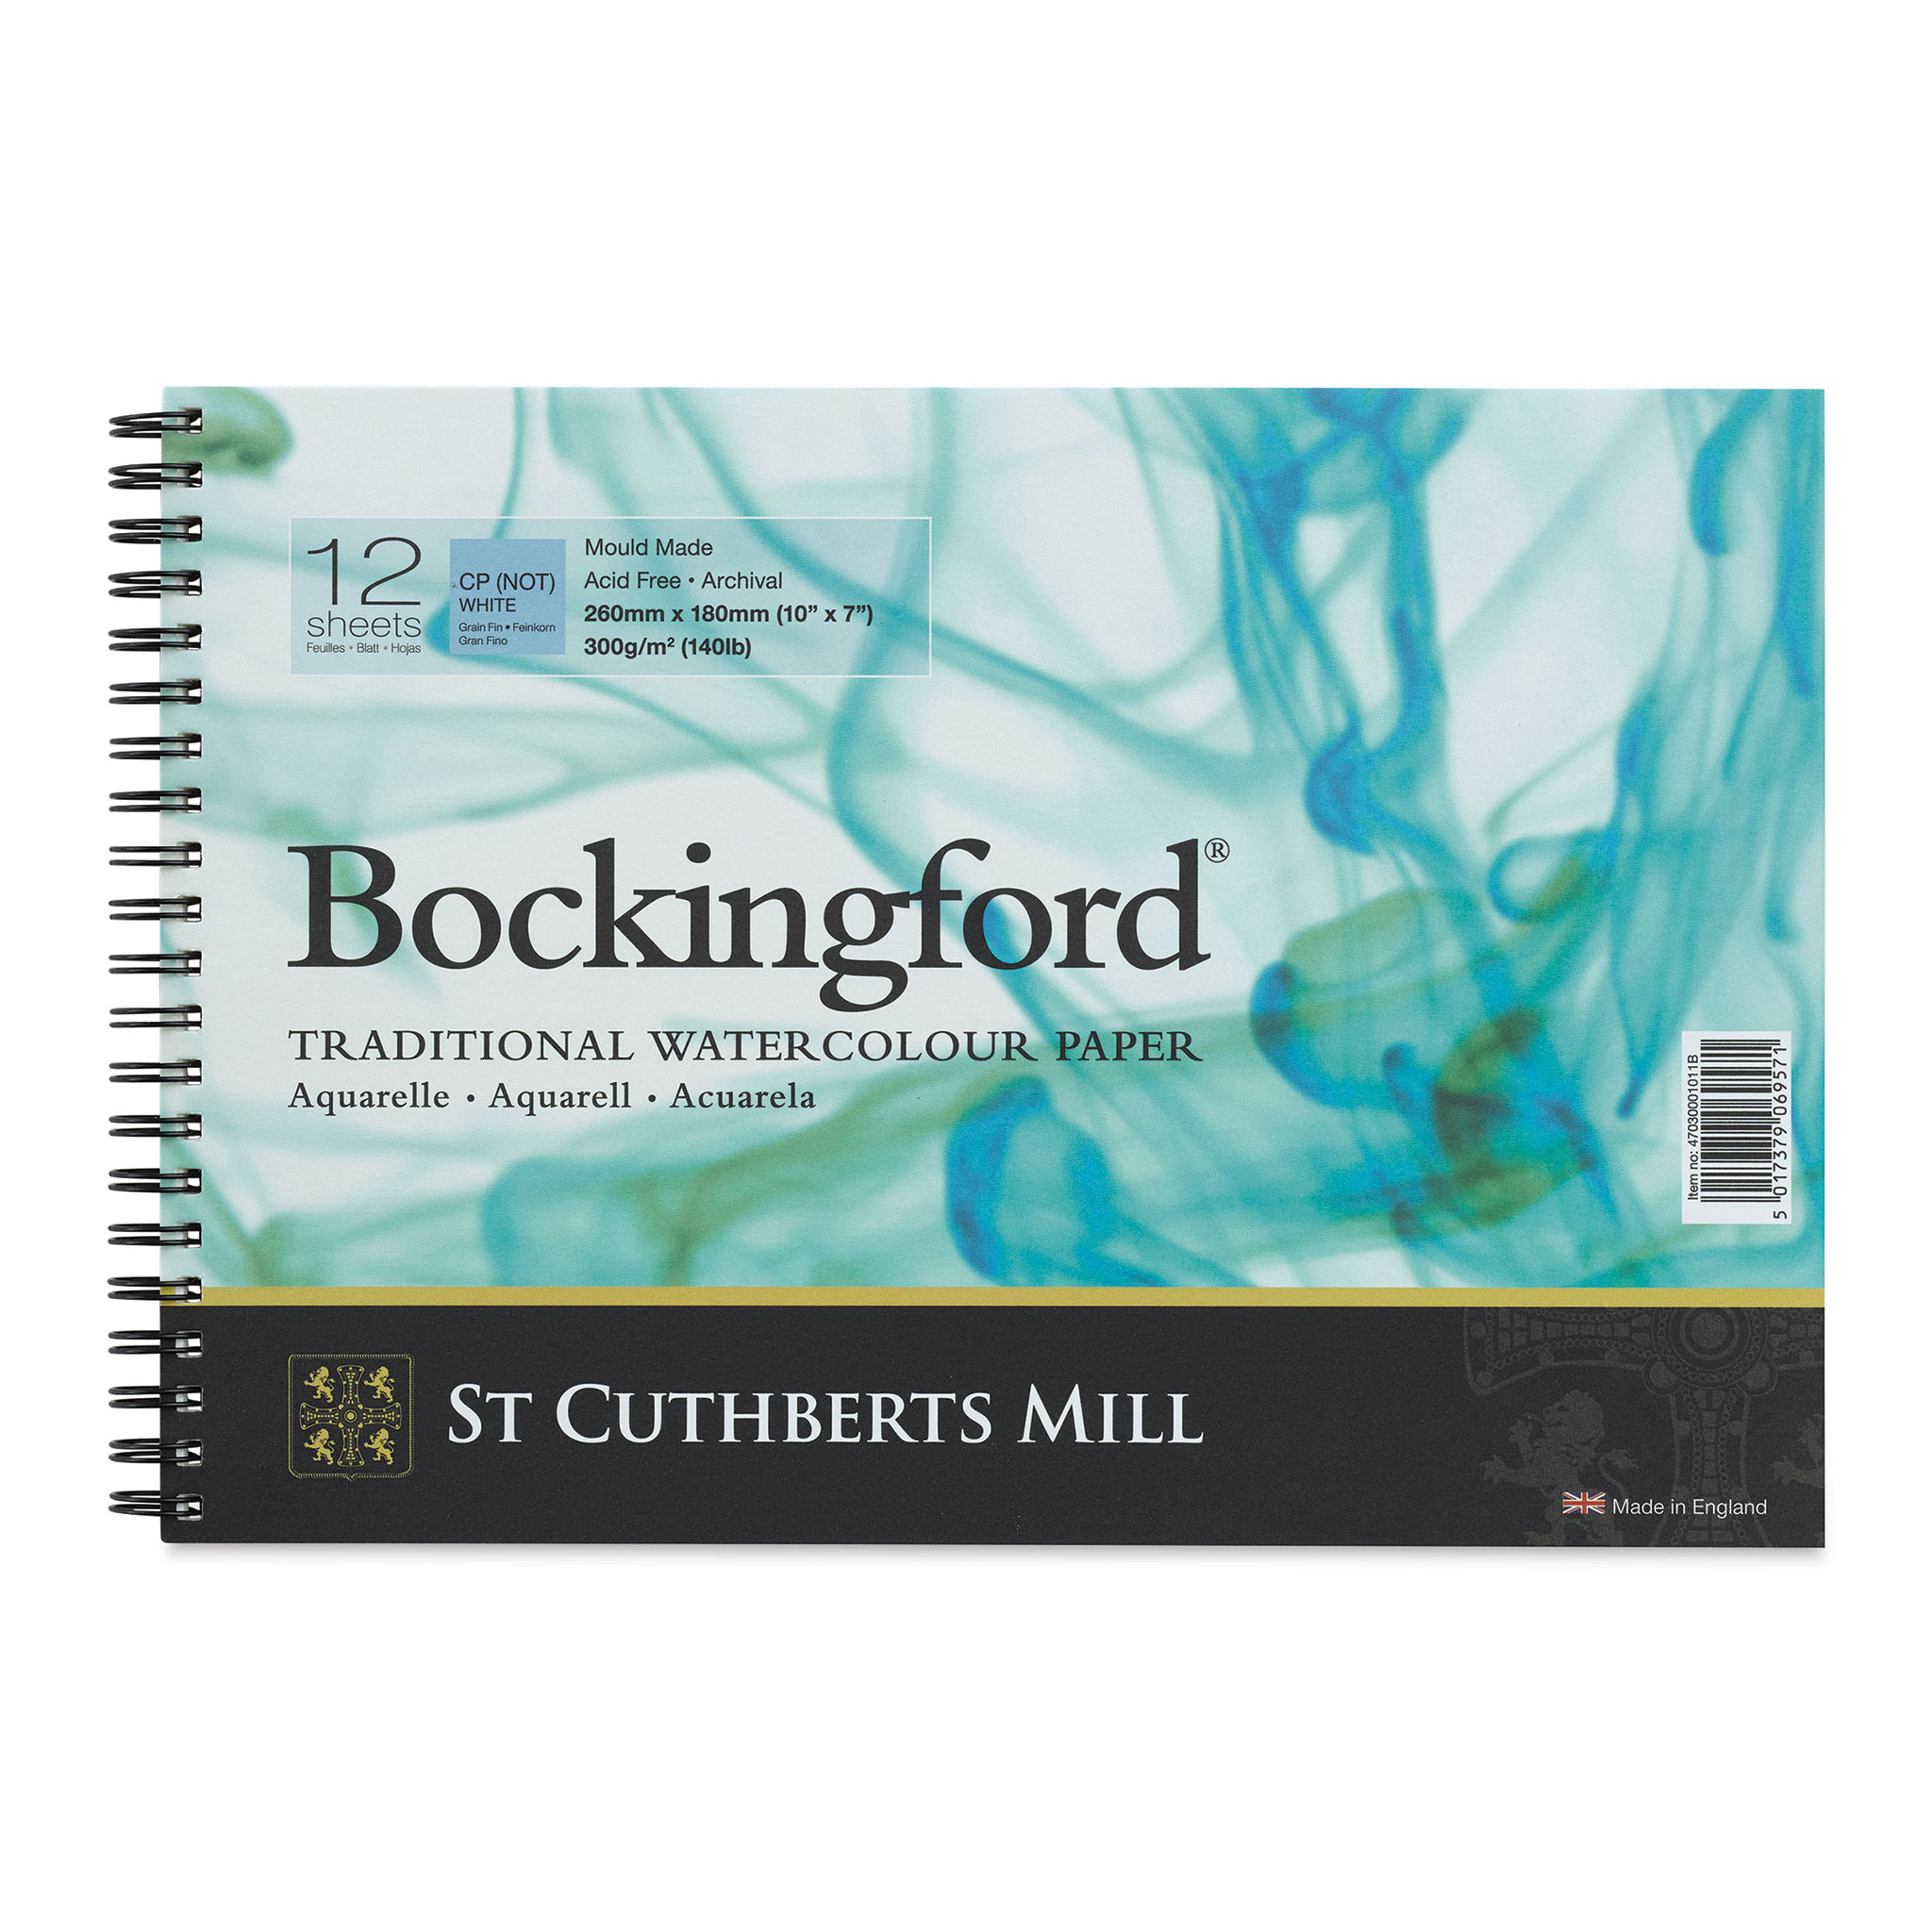  St. Cuthberts Mill Bockingford Watercolor Paper Spiral